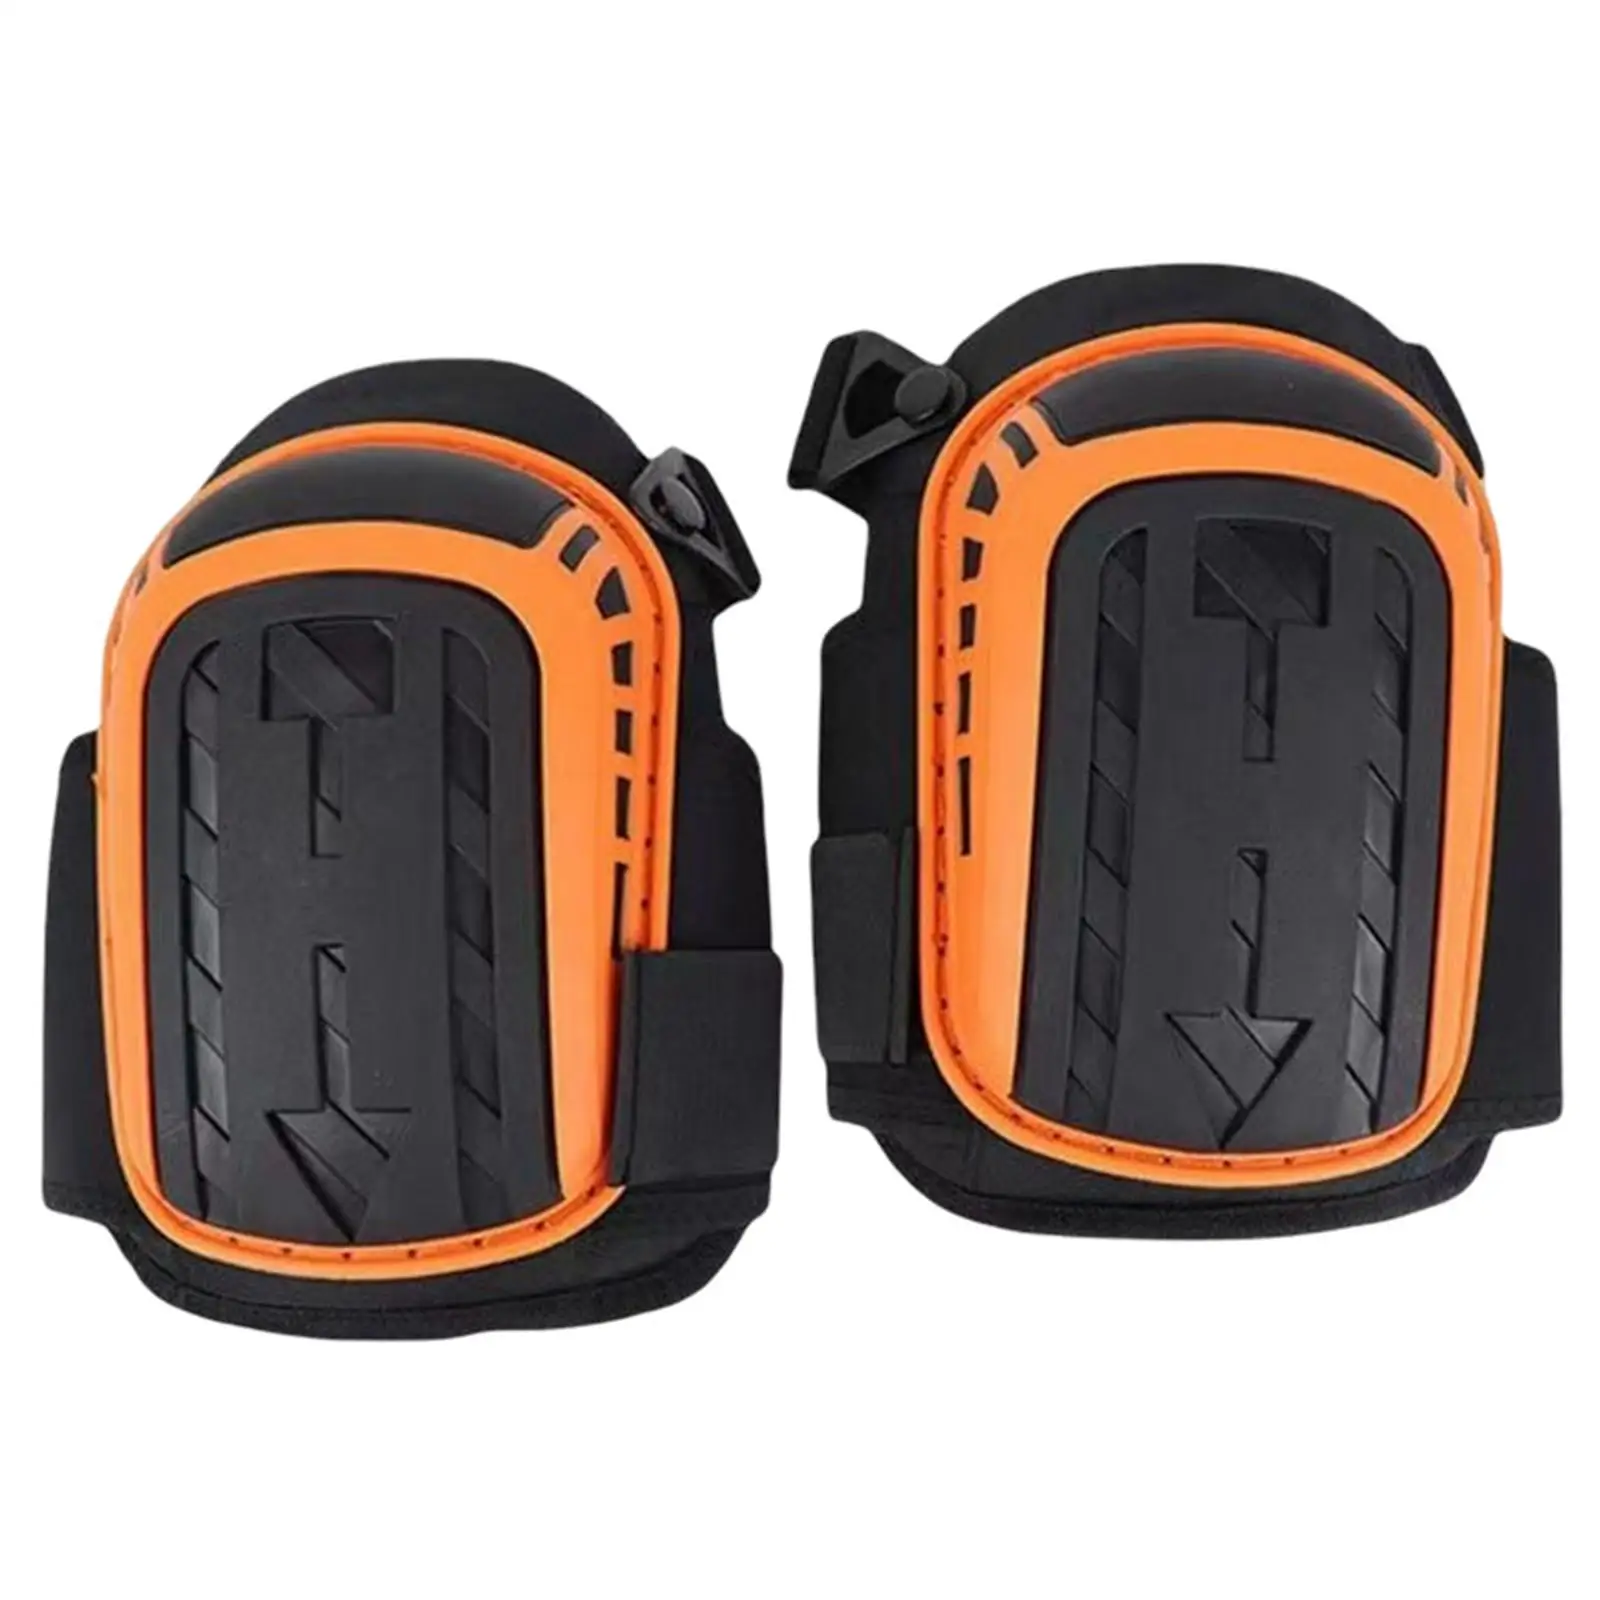 Adjustable Straps Knee Pads 2x Strong Stretchable Straps Heavy Duty Comfortable Knee Pads for Work for Skating Adults Garden